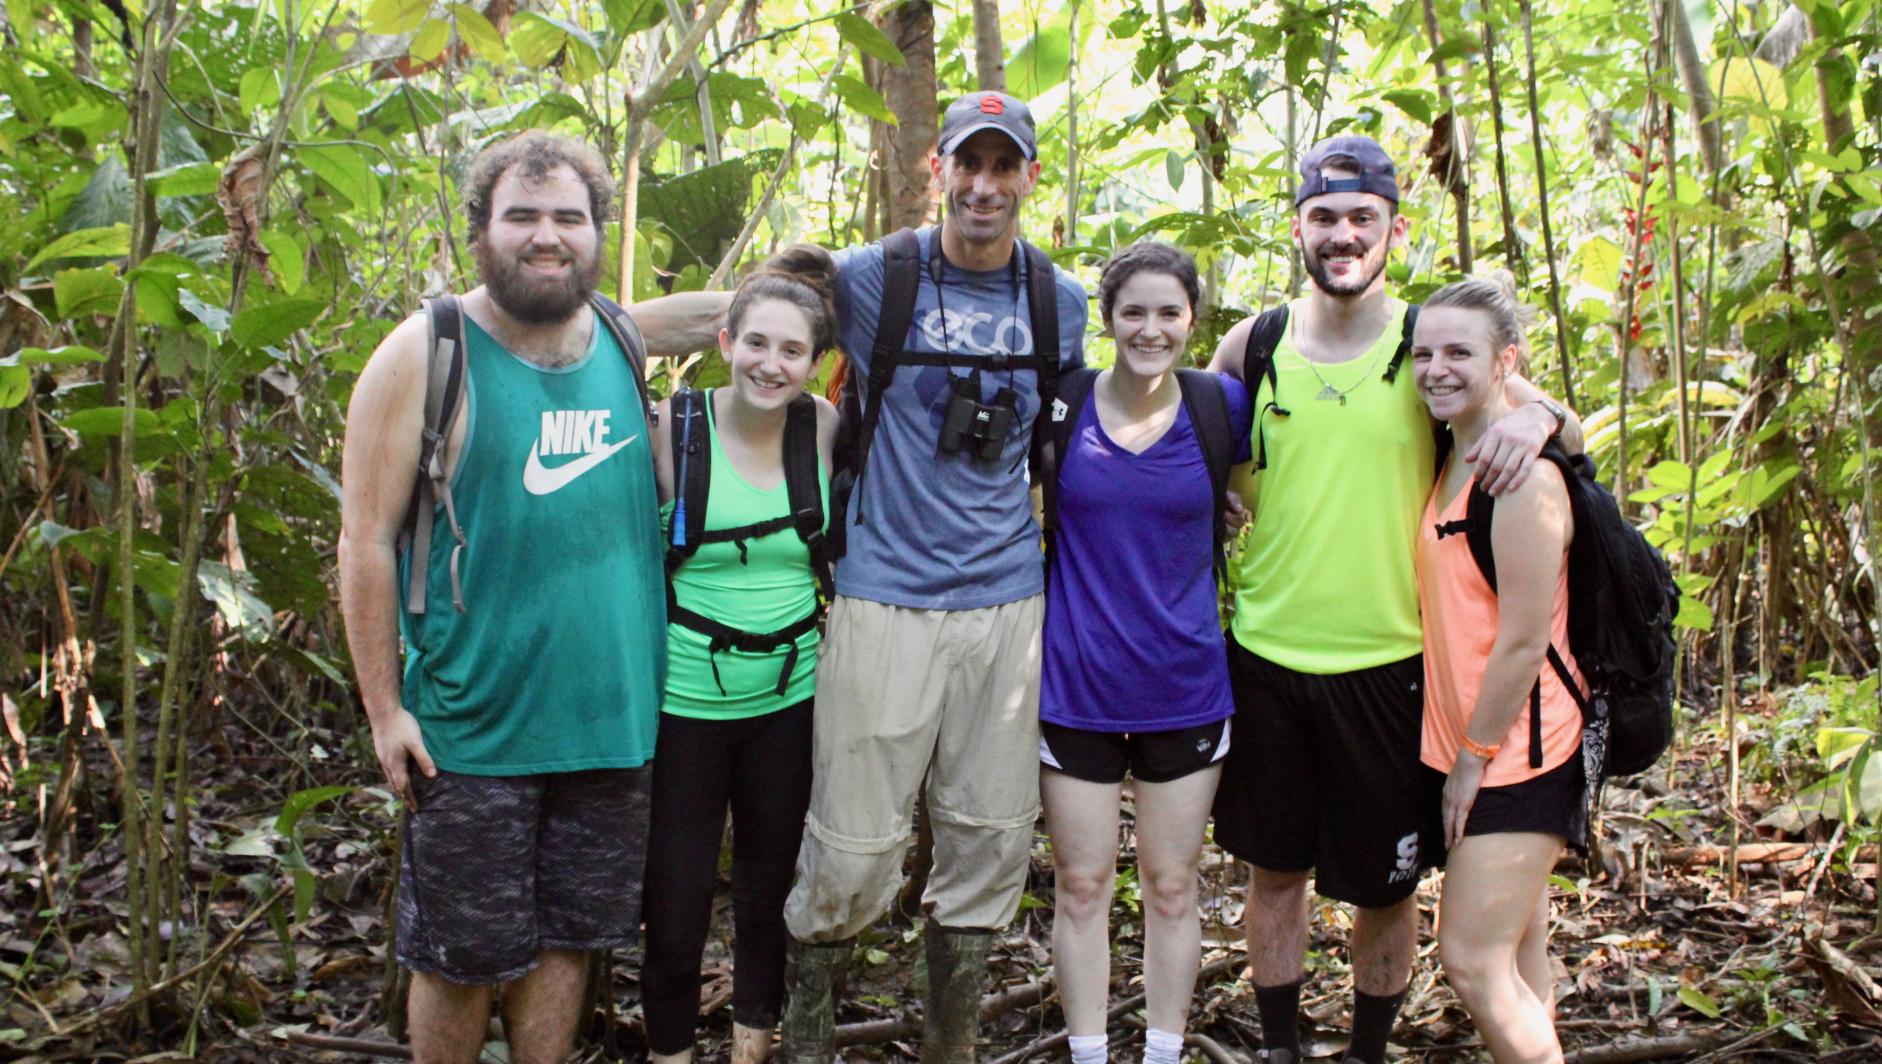 Group picture in Costa Rica